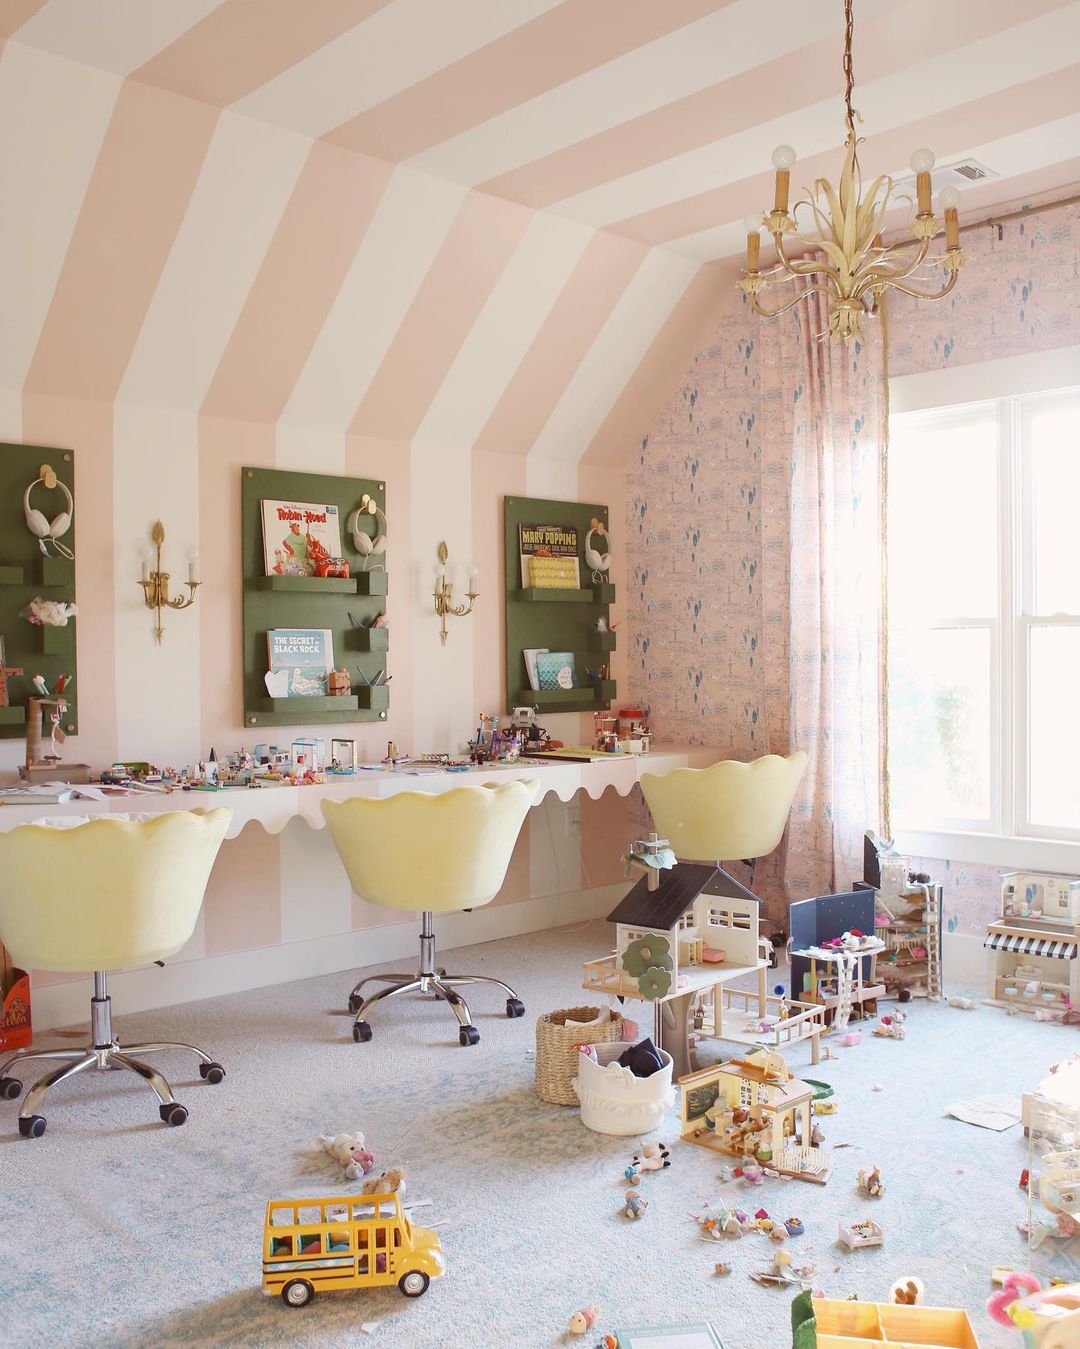 A Calico Critters play area in a girly playroom